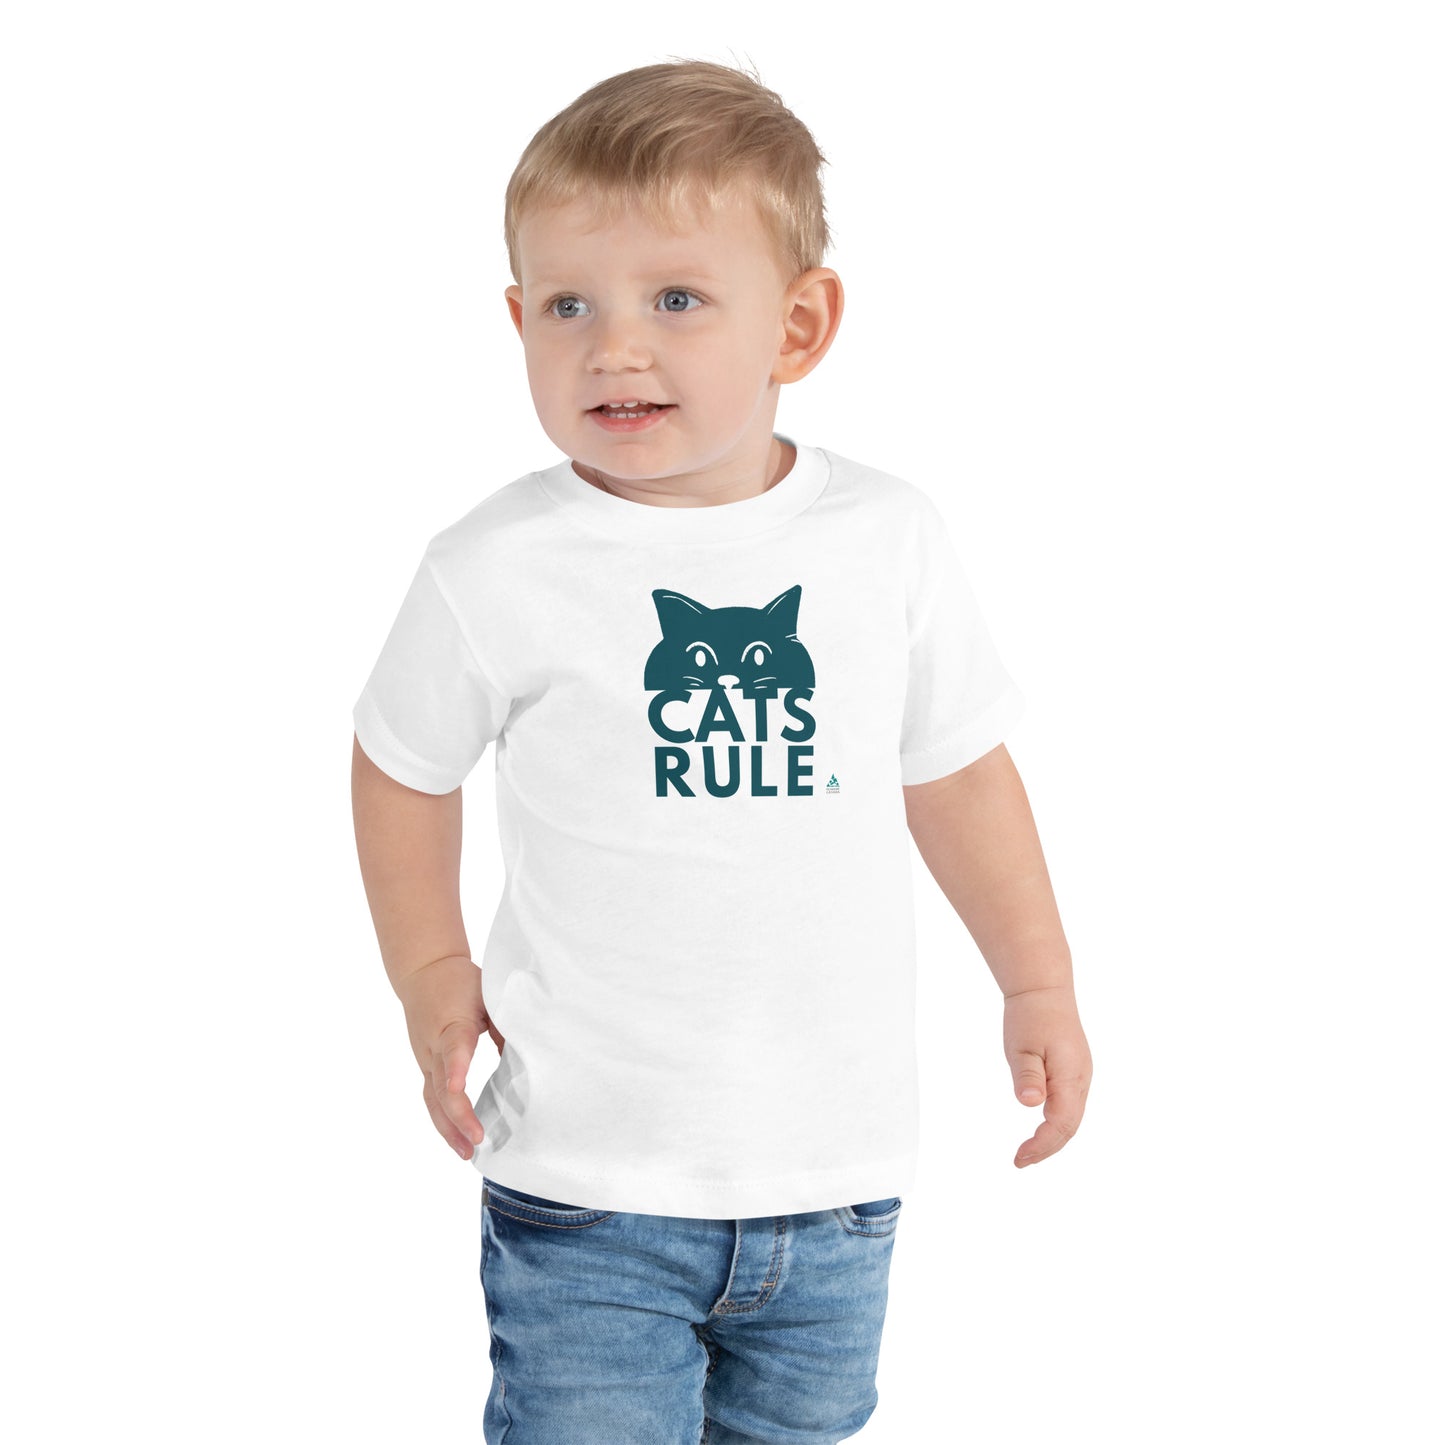 Cats Rule - Toddler Short Sleeve Tee